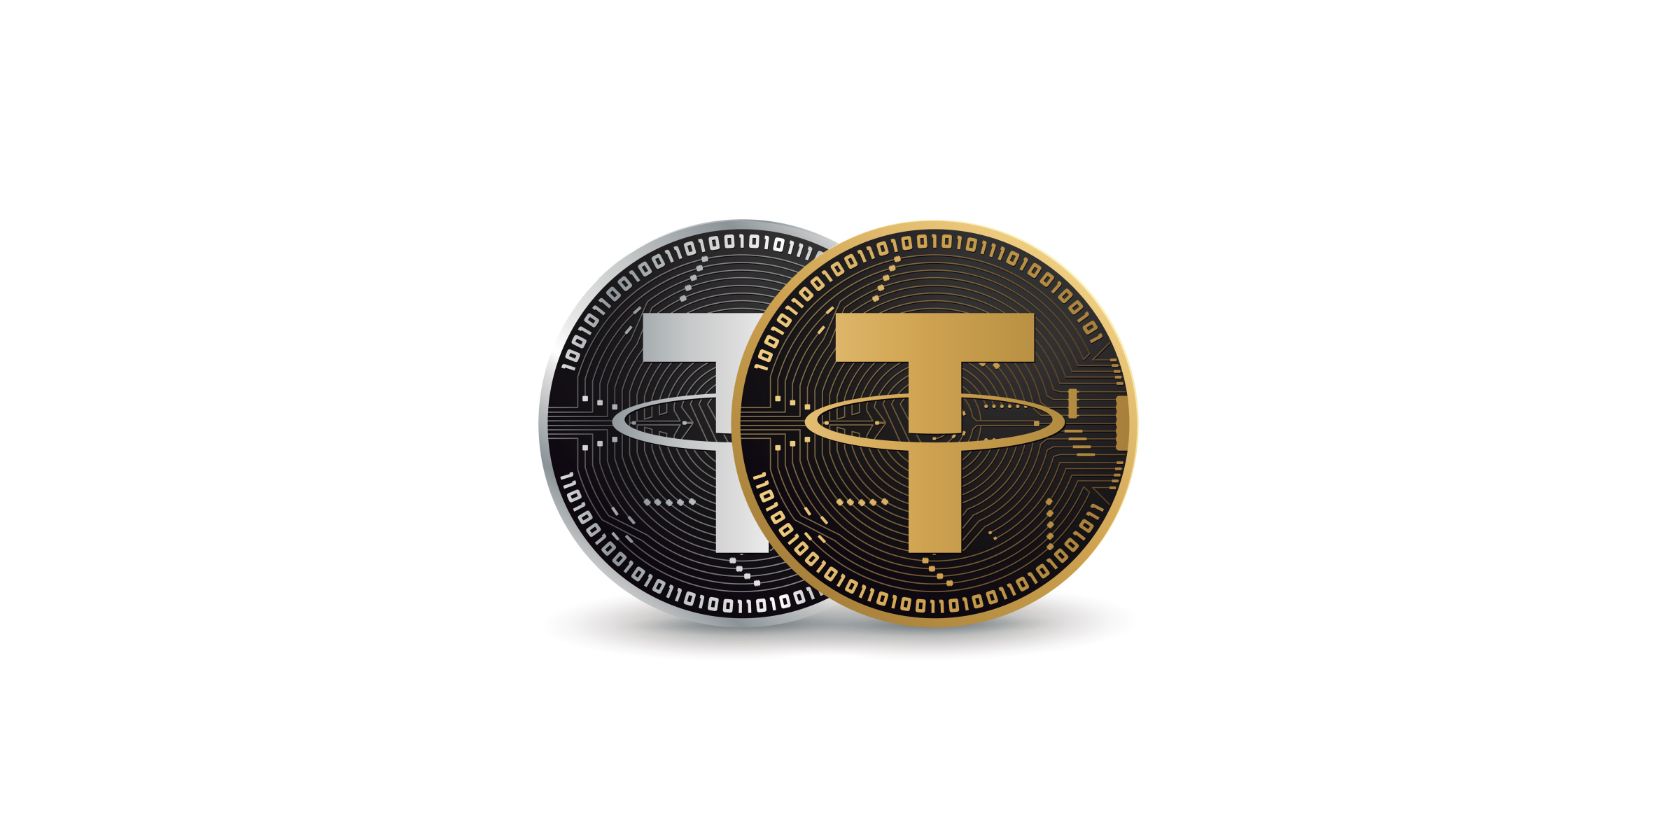 How Does Tether (USDT) Work and Why Is It So Controversial?